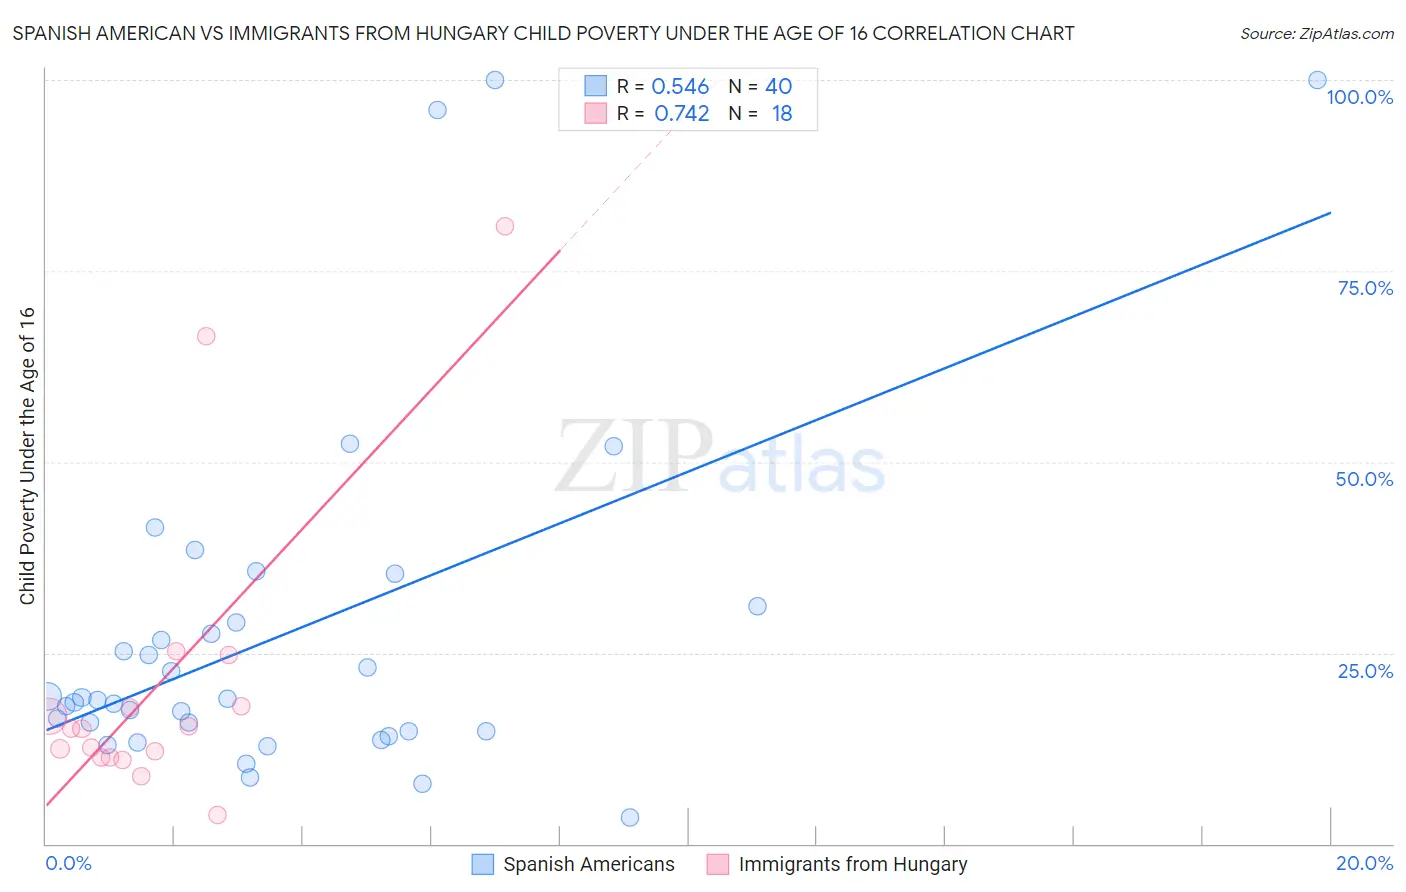 Spanish American vs Immigrants from Hungary Child Poverty Under the Age of 16